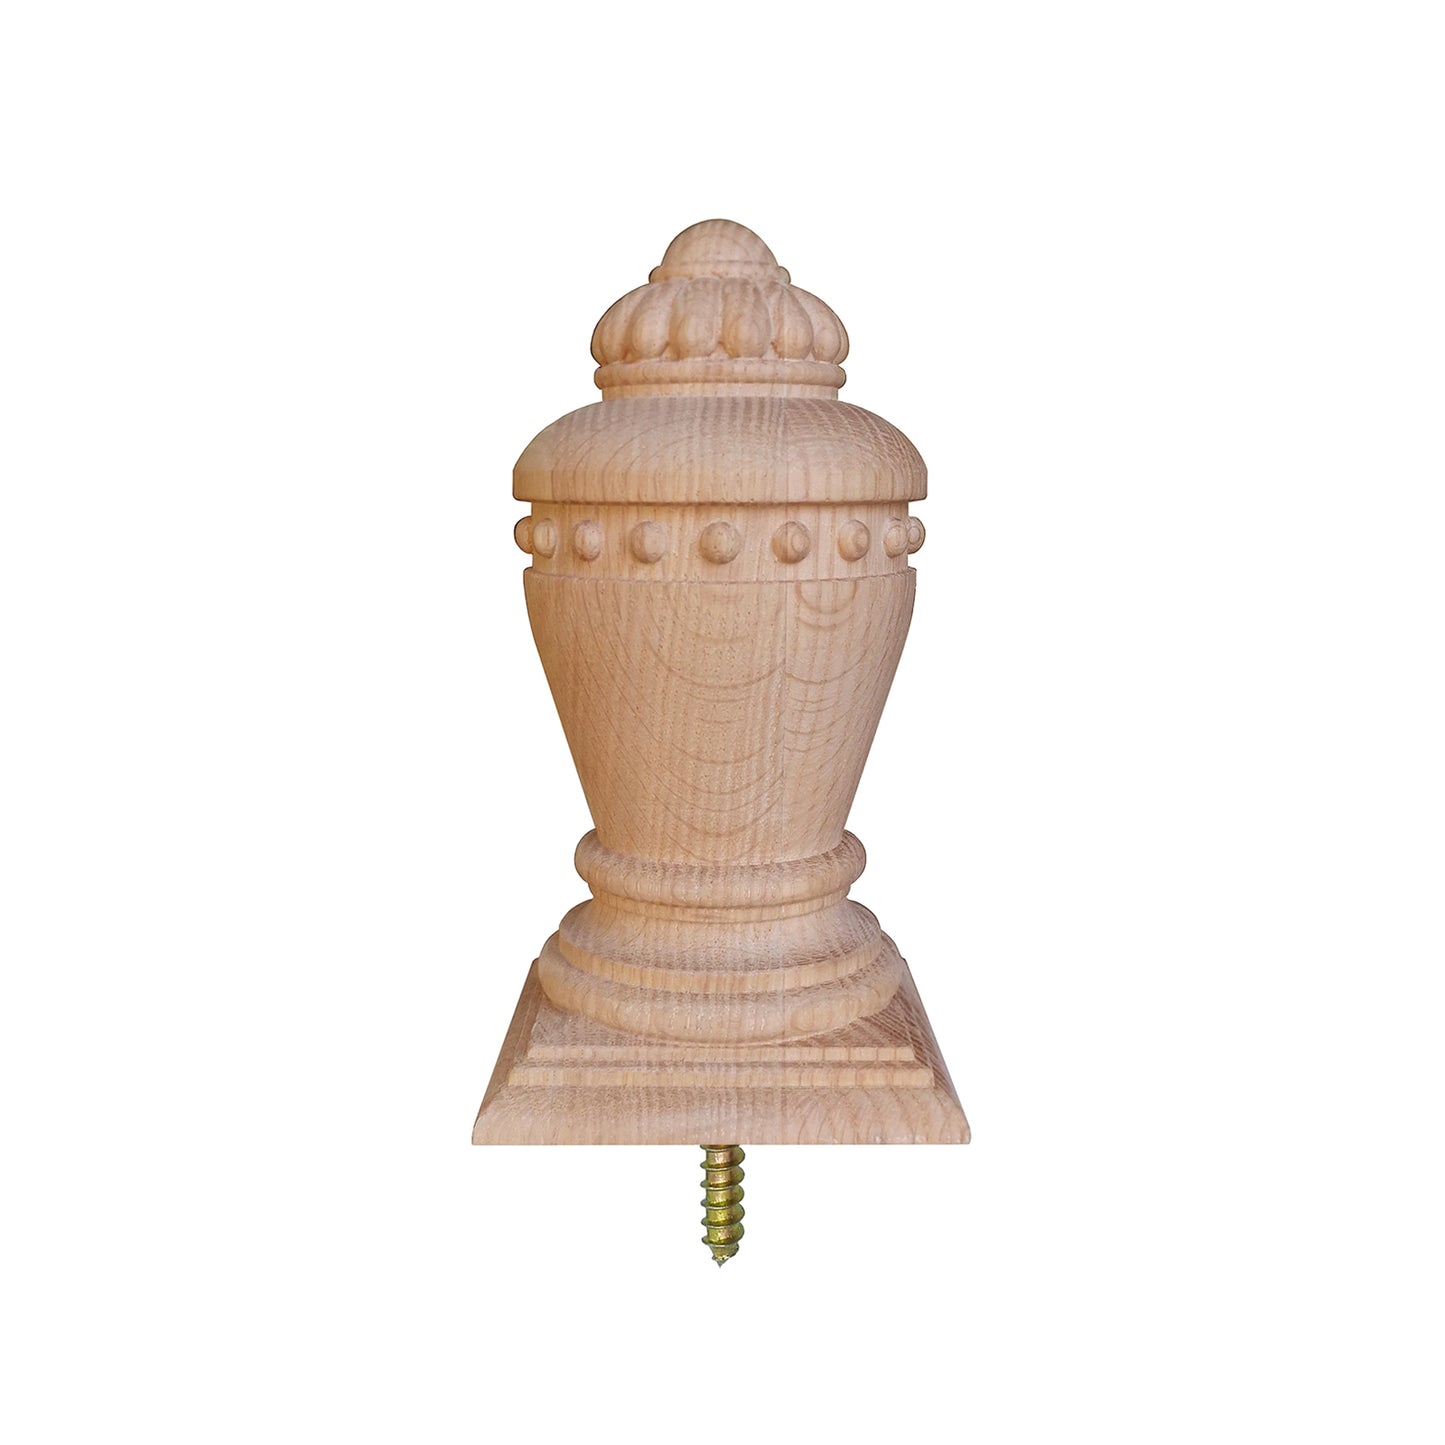 Colonial Stair Newel Post 7-1/8"H Square Bottom Wood Finial, Single